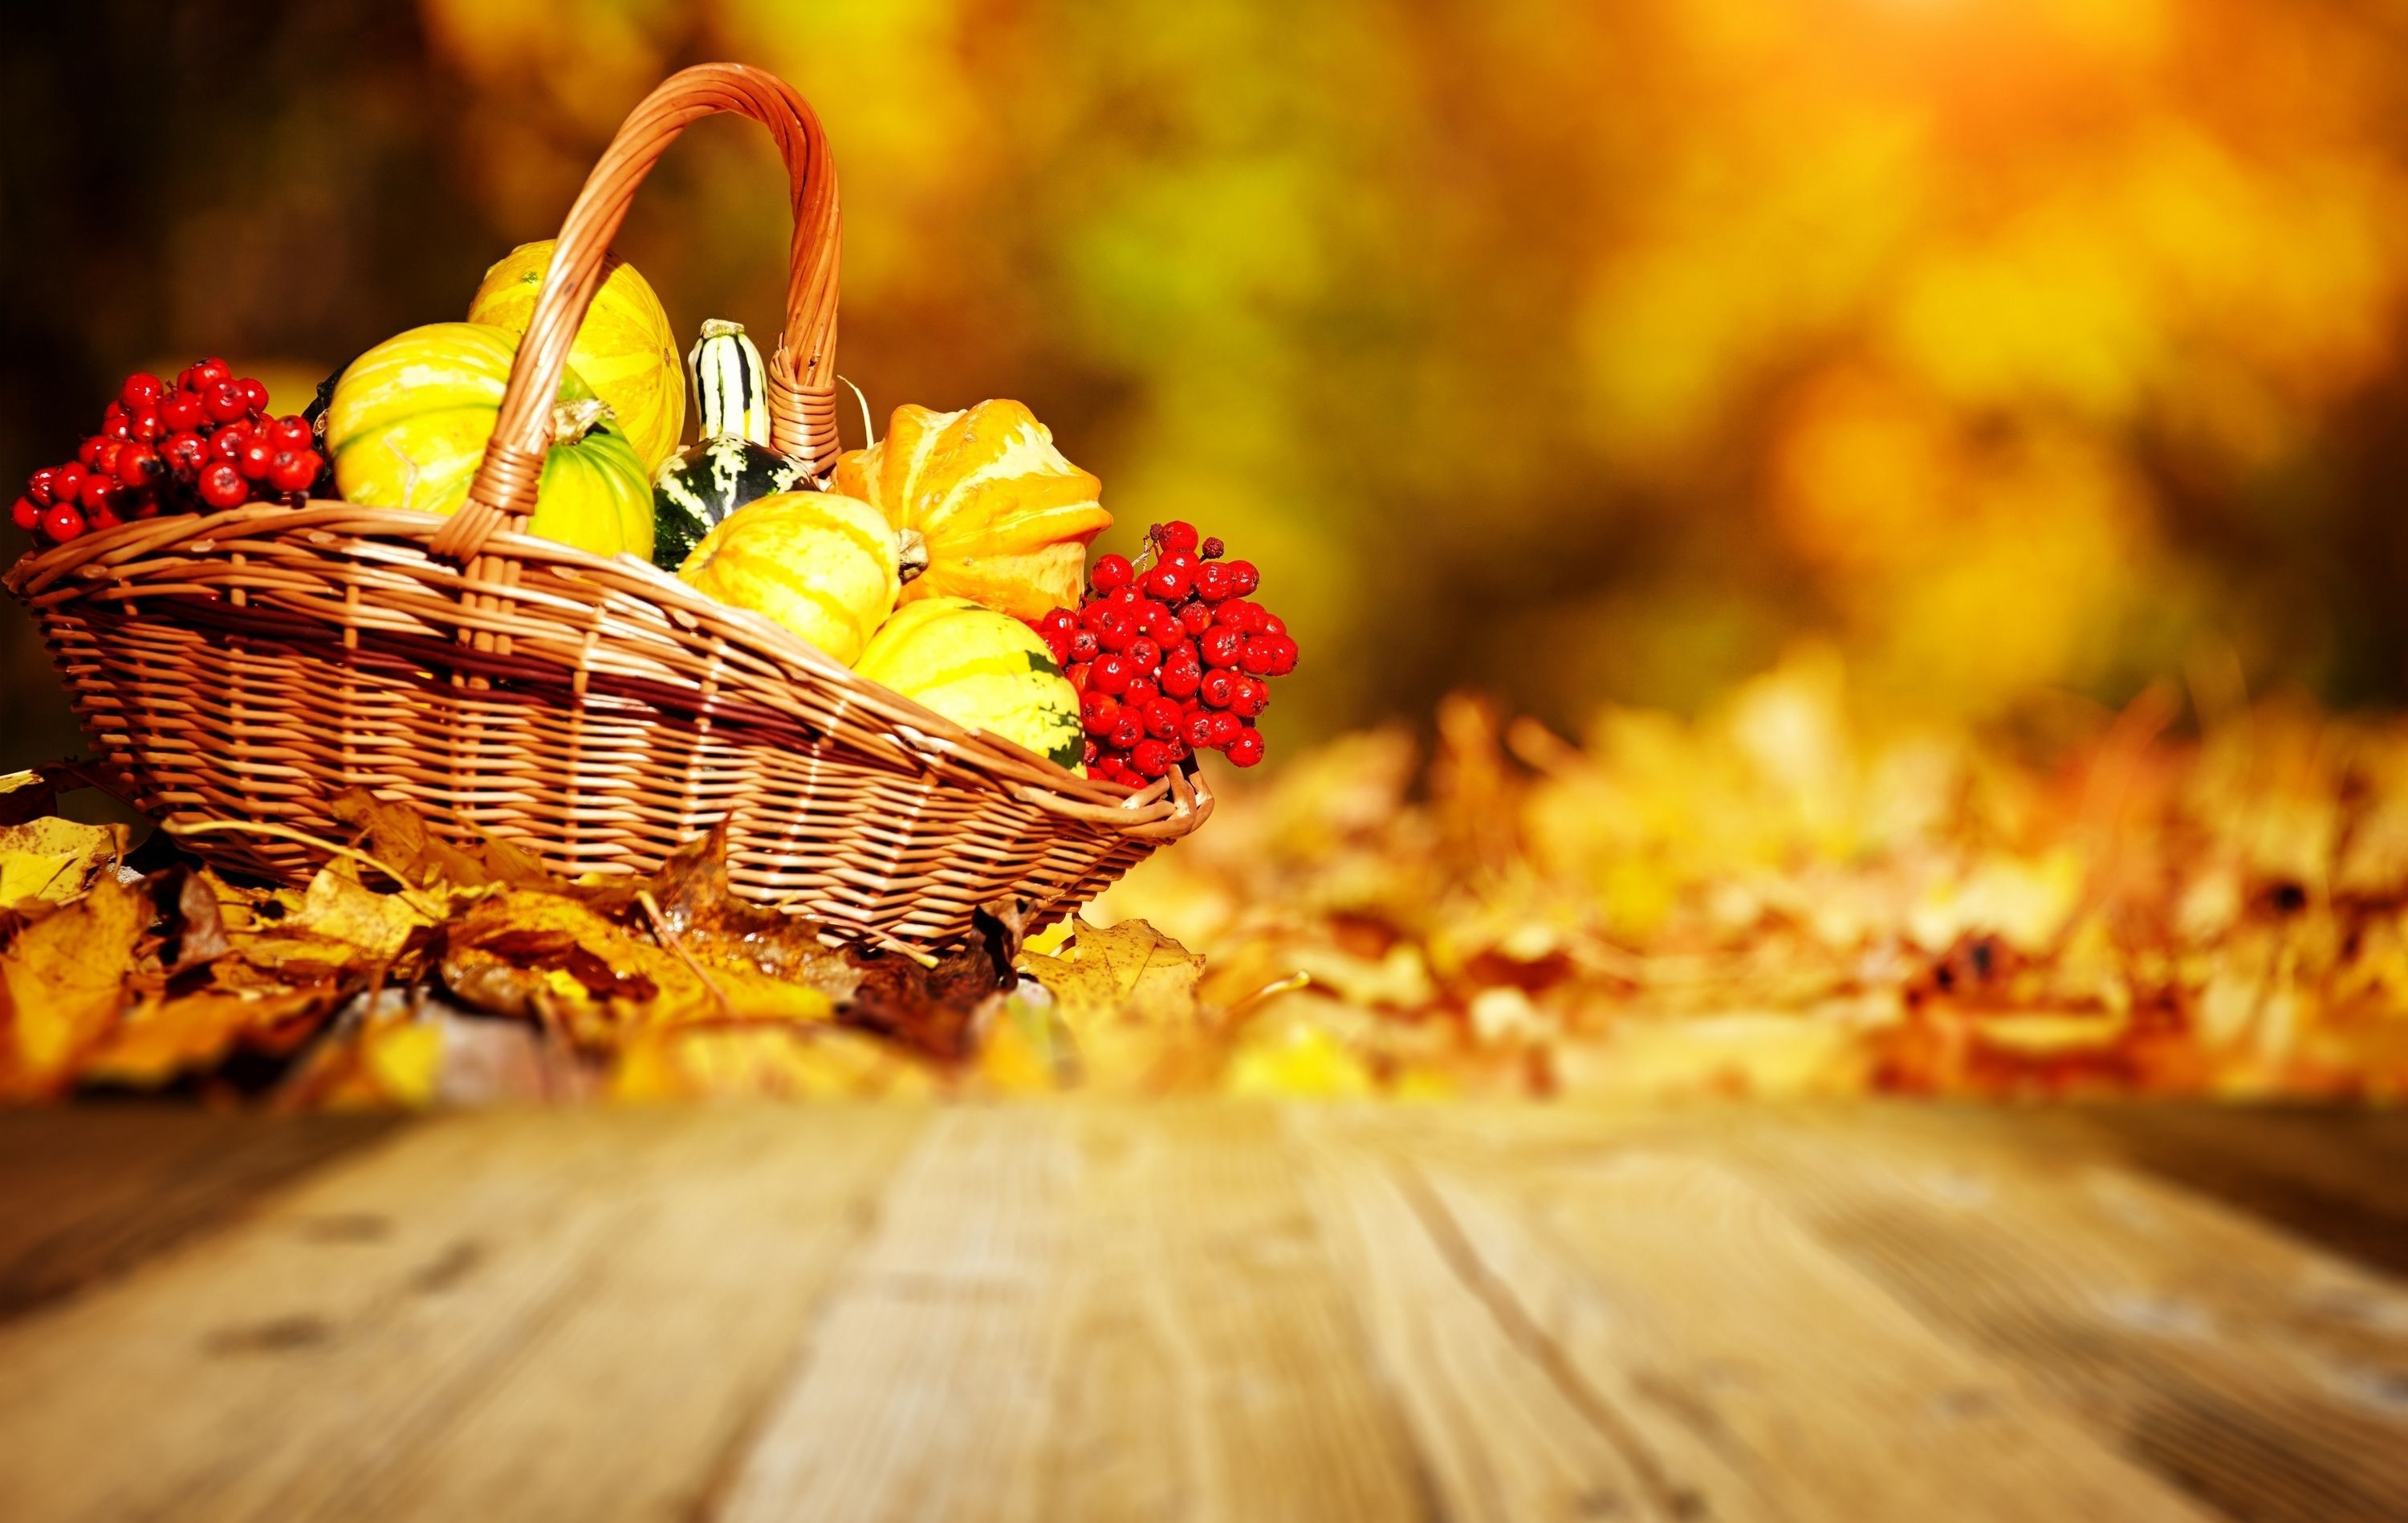 Fall Harvest Wallpaper Picture. Fall wallpaper, Wallpaper, Wallpaper picture